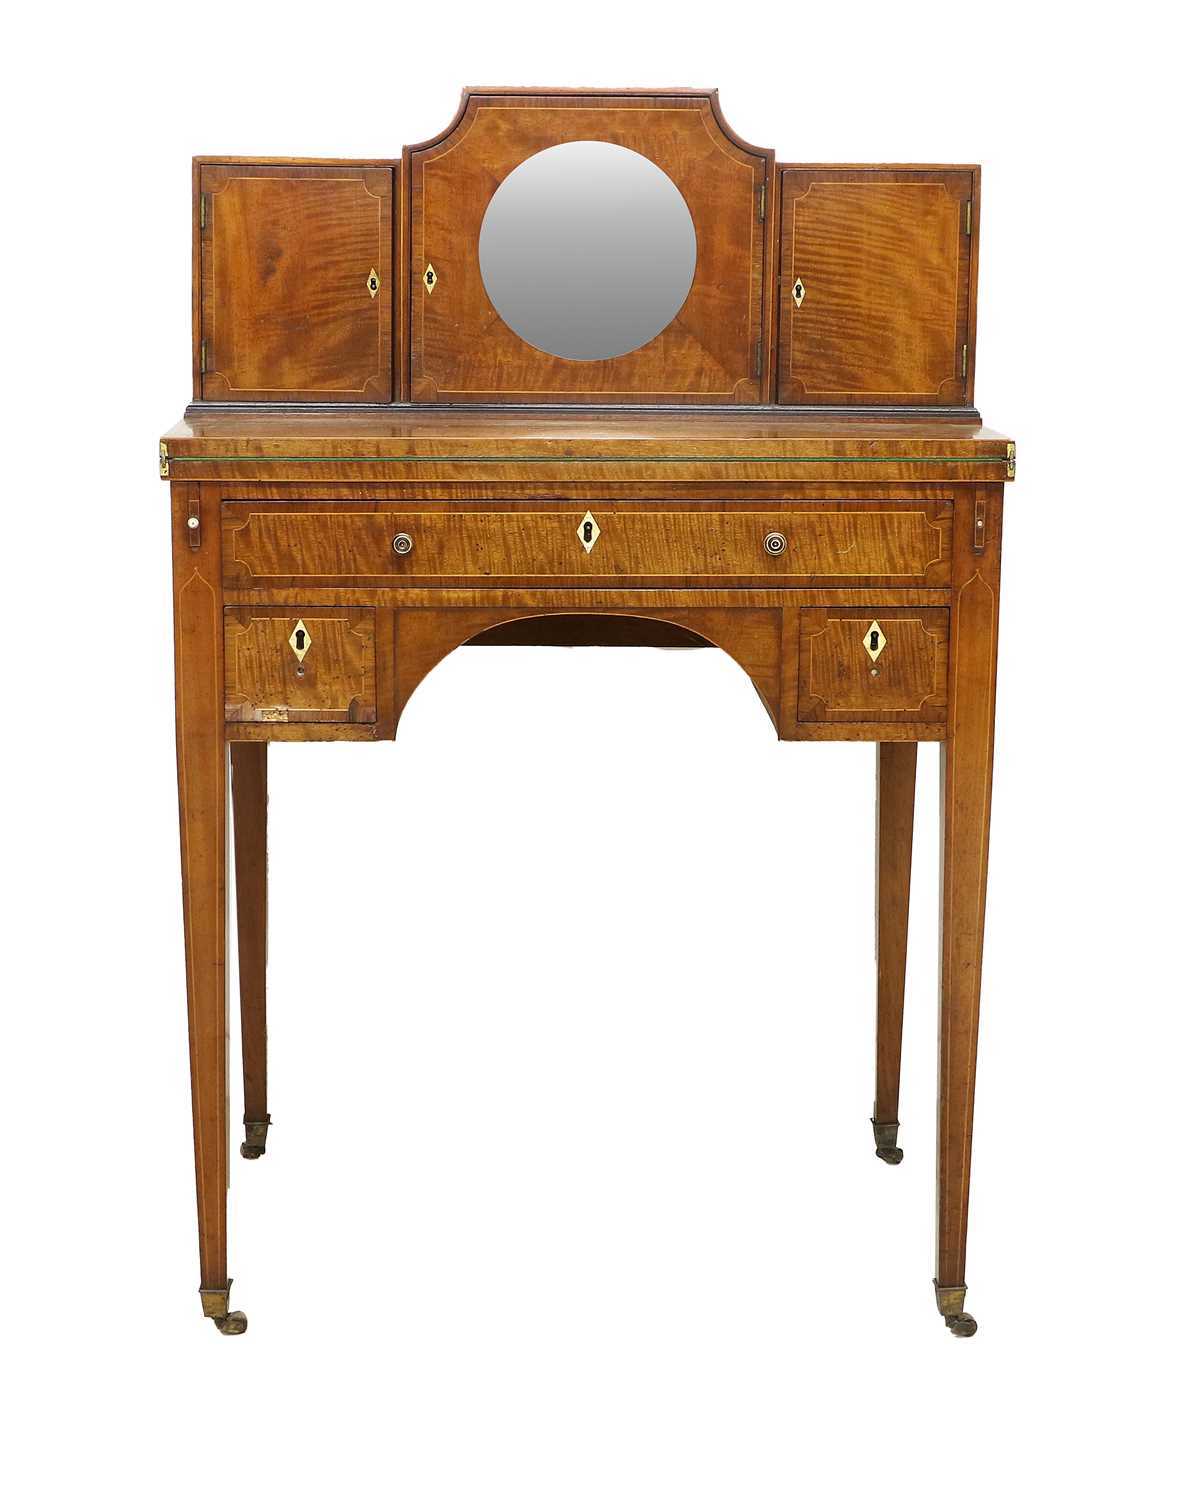 A George III Mahogany, Boxwood and Rosewood-Crossbanded Writing Desk, early 19th century, the